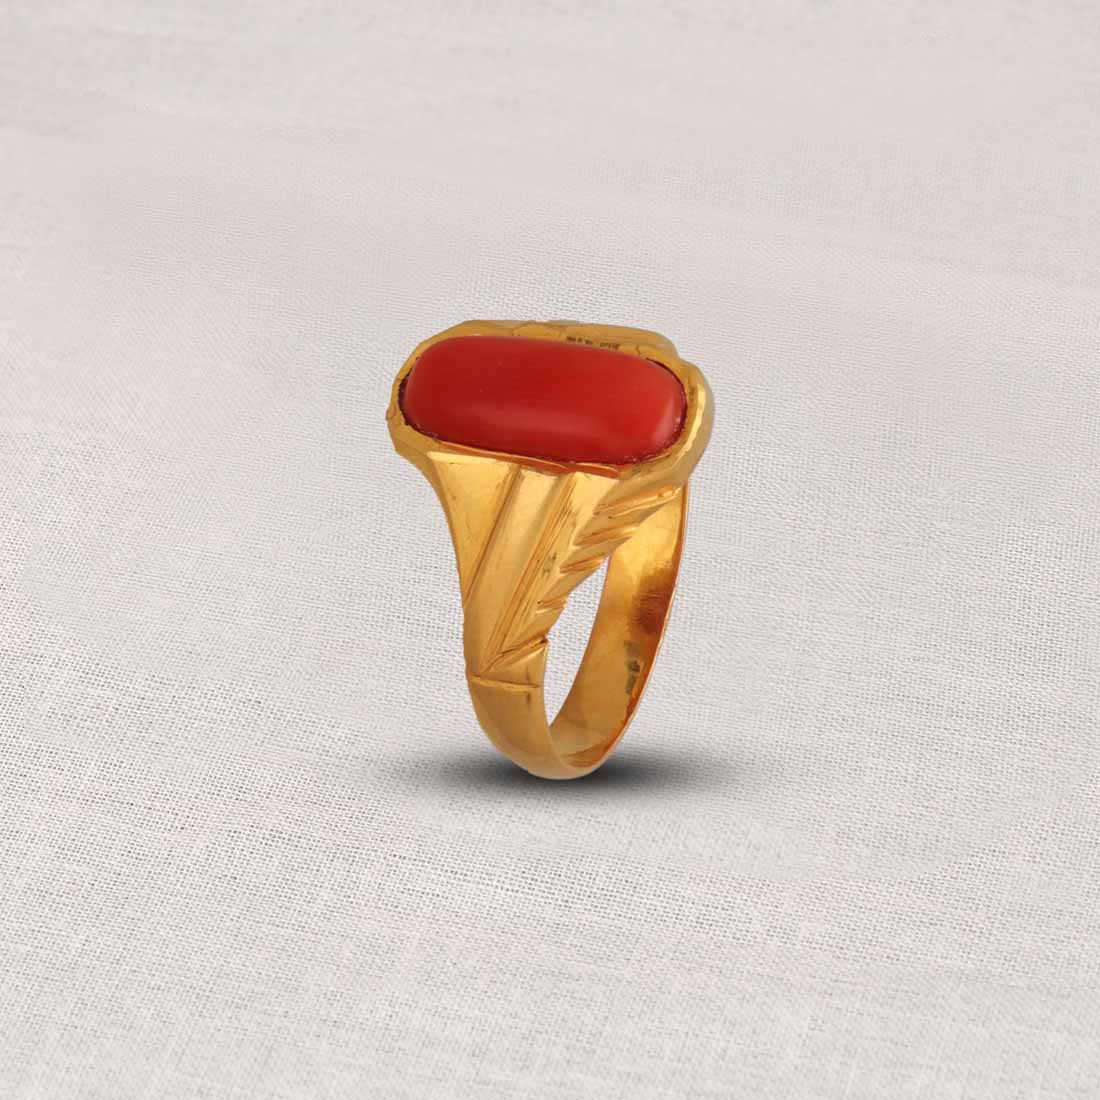 18K Red Coral Gold Ring 4.6g Size 7 – Coin Gold & Stamp Buyer SF